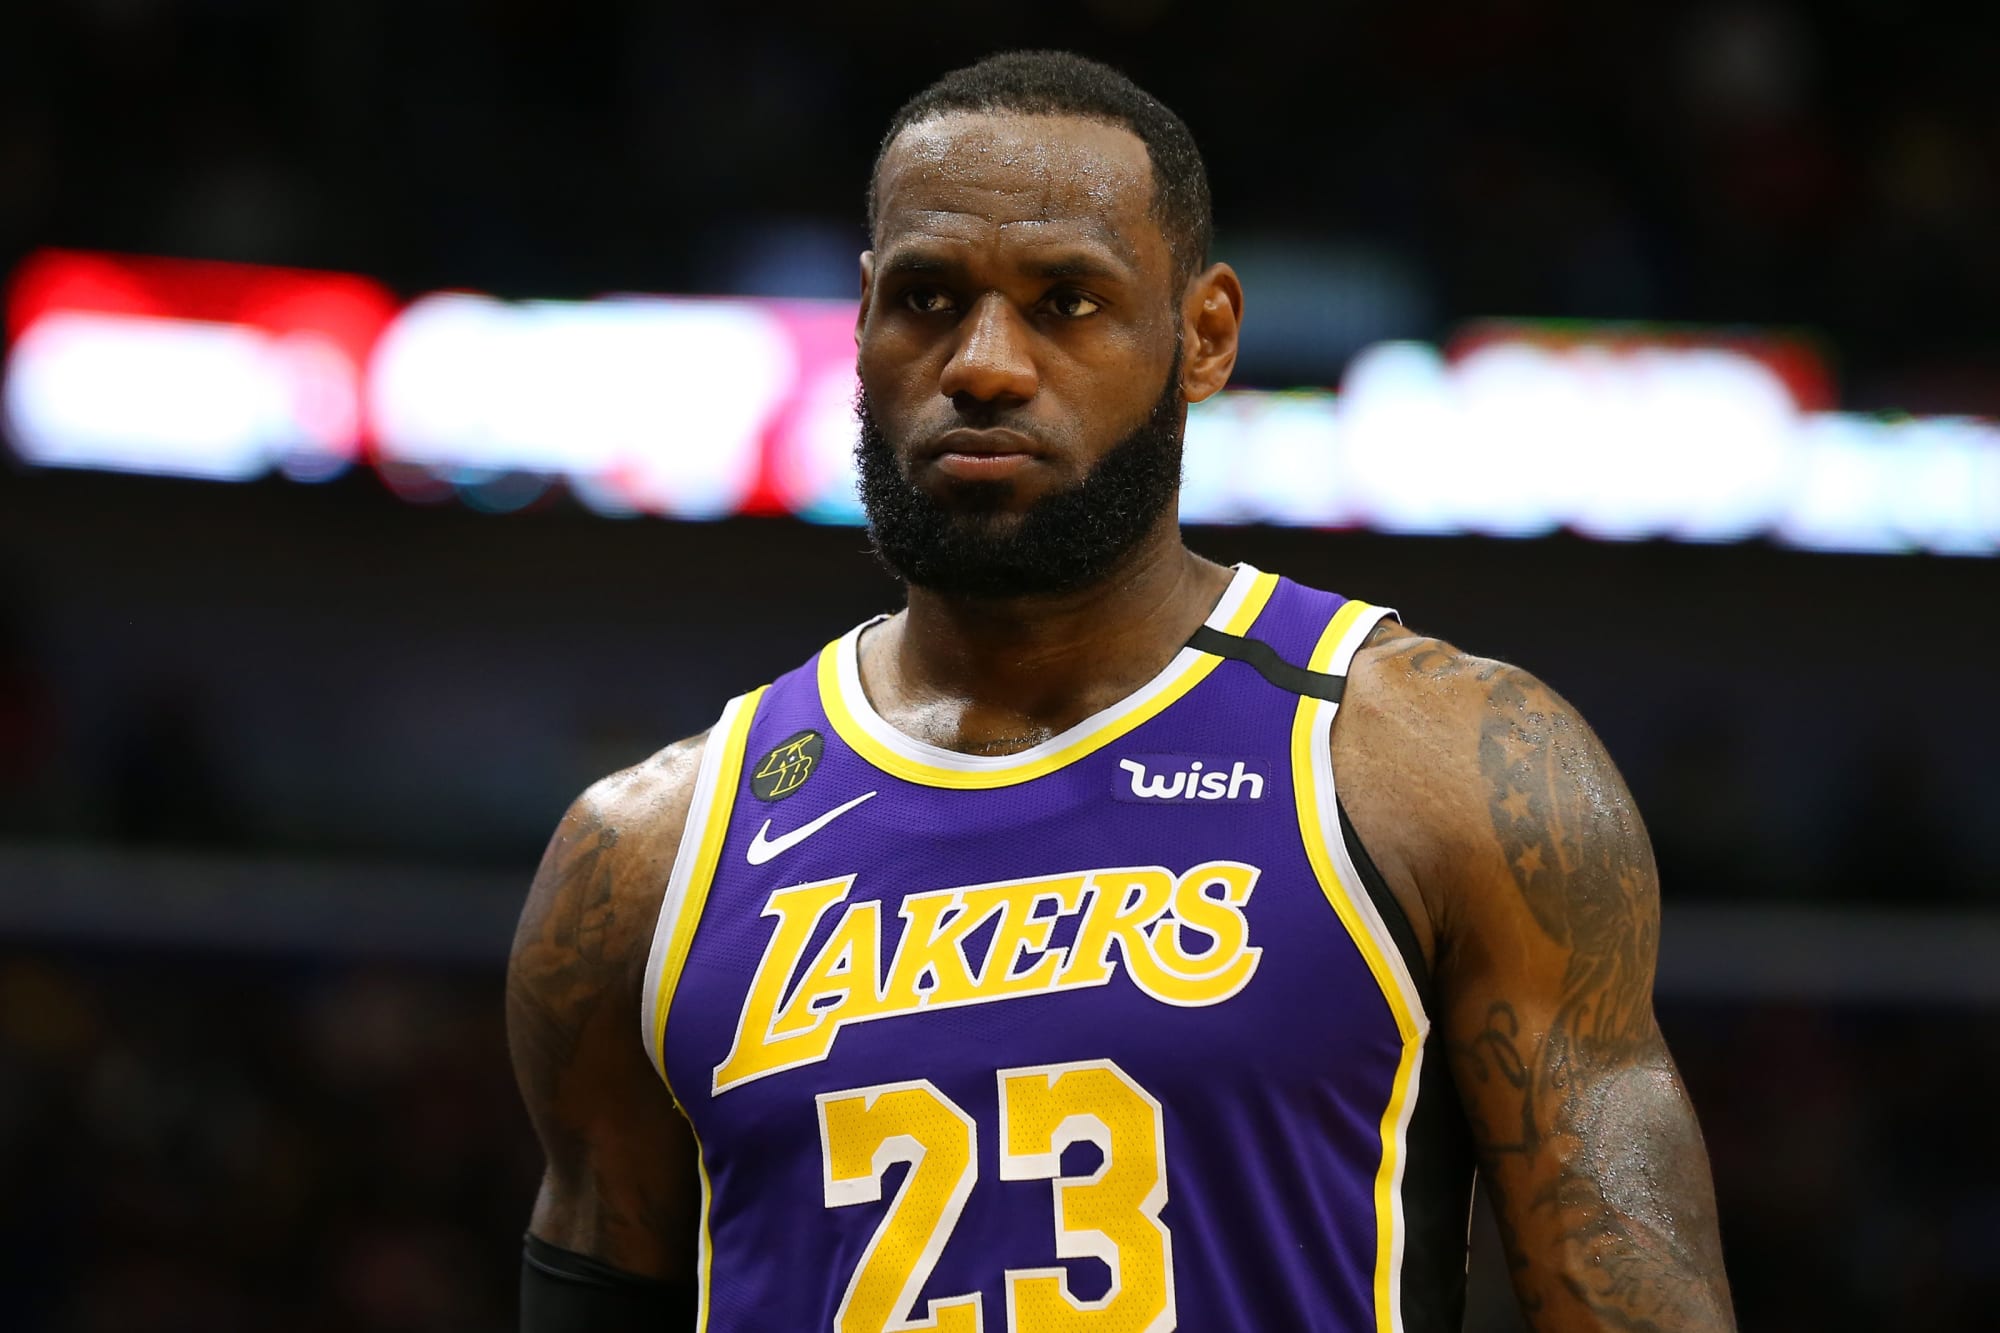 LeBron James is searching for information regarding the shooting death of Ericka Weems thumbnail